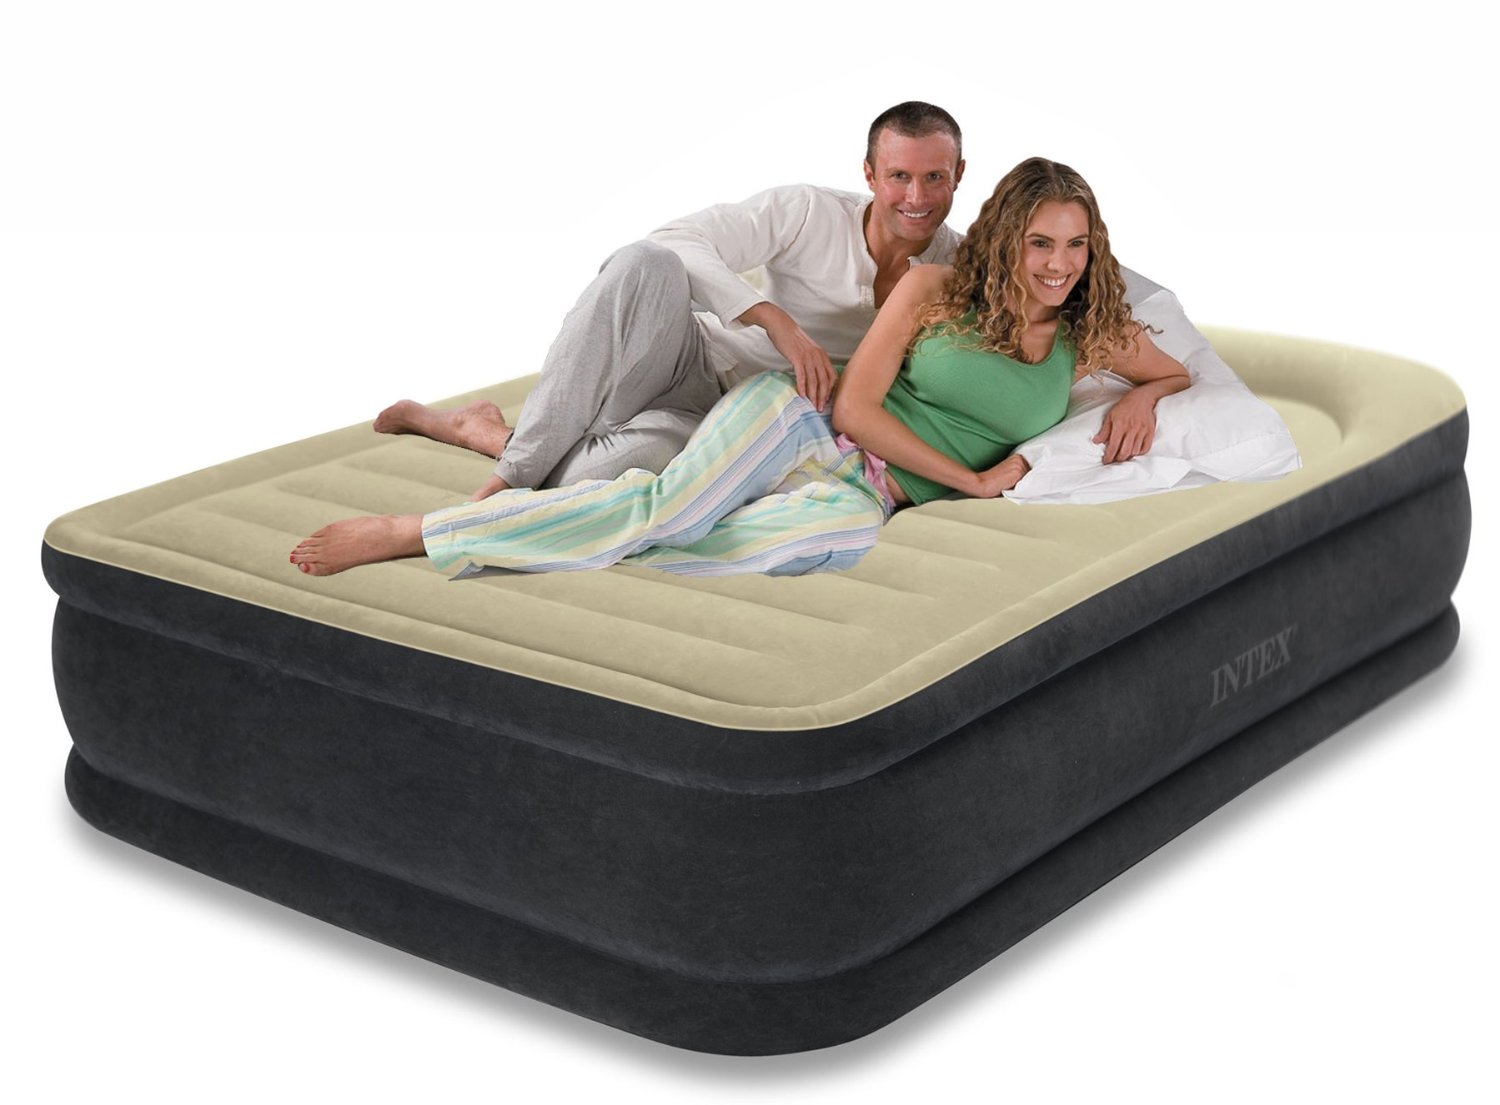 http://www.only-airbeds.co.uk/user/products/large/Intex%2064408%20premium%20comfort.jpg